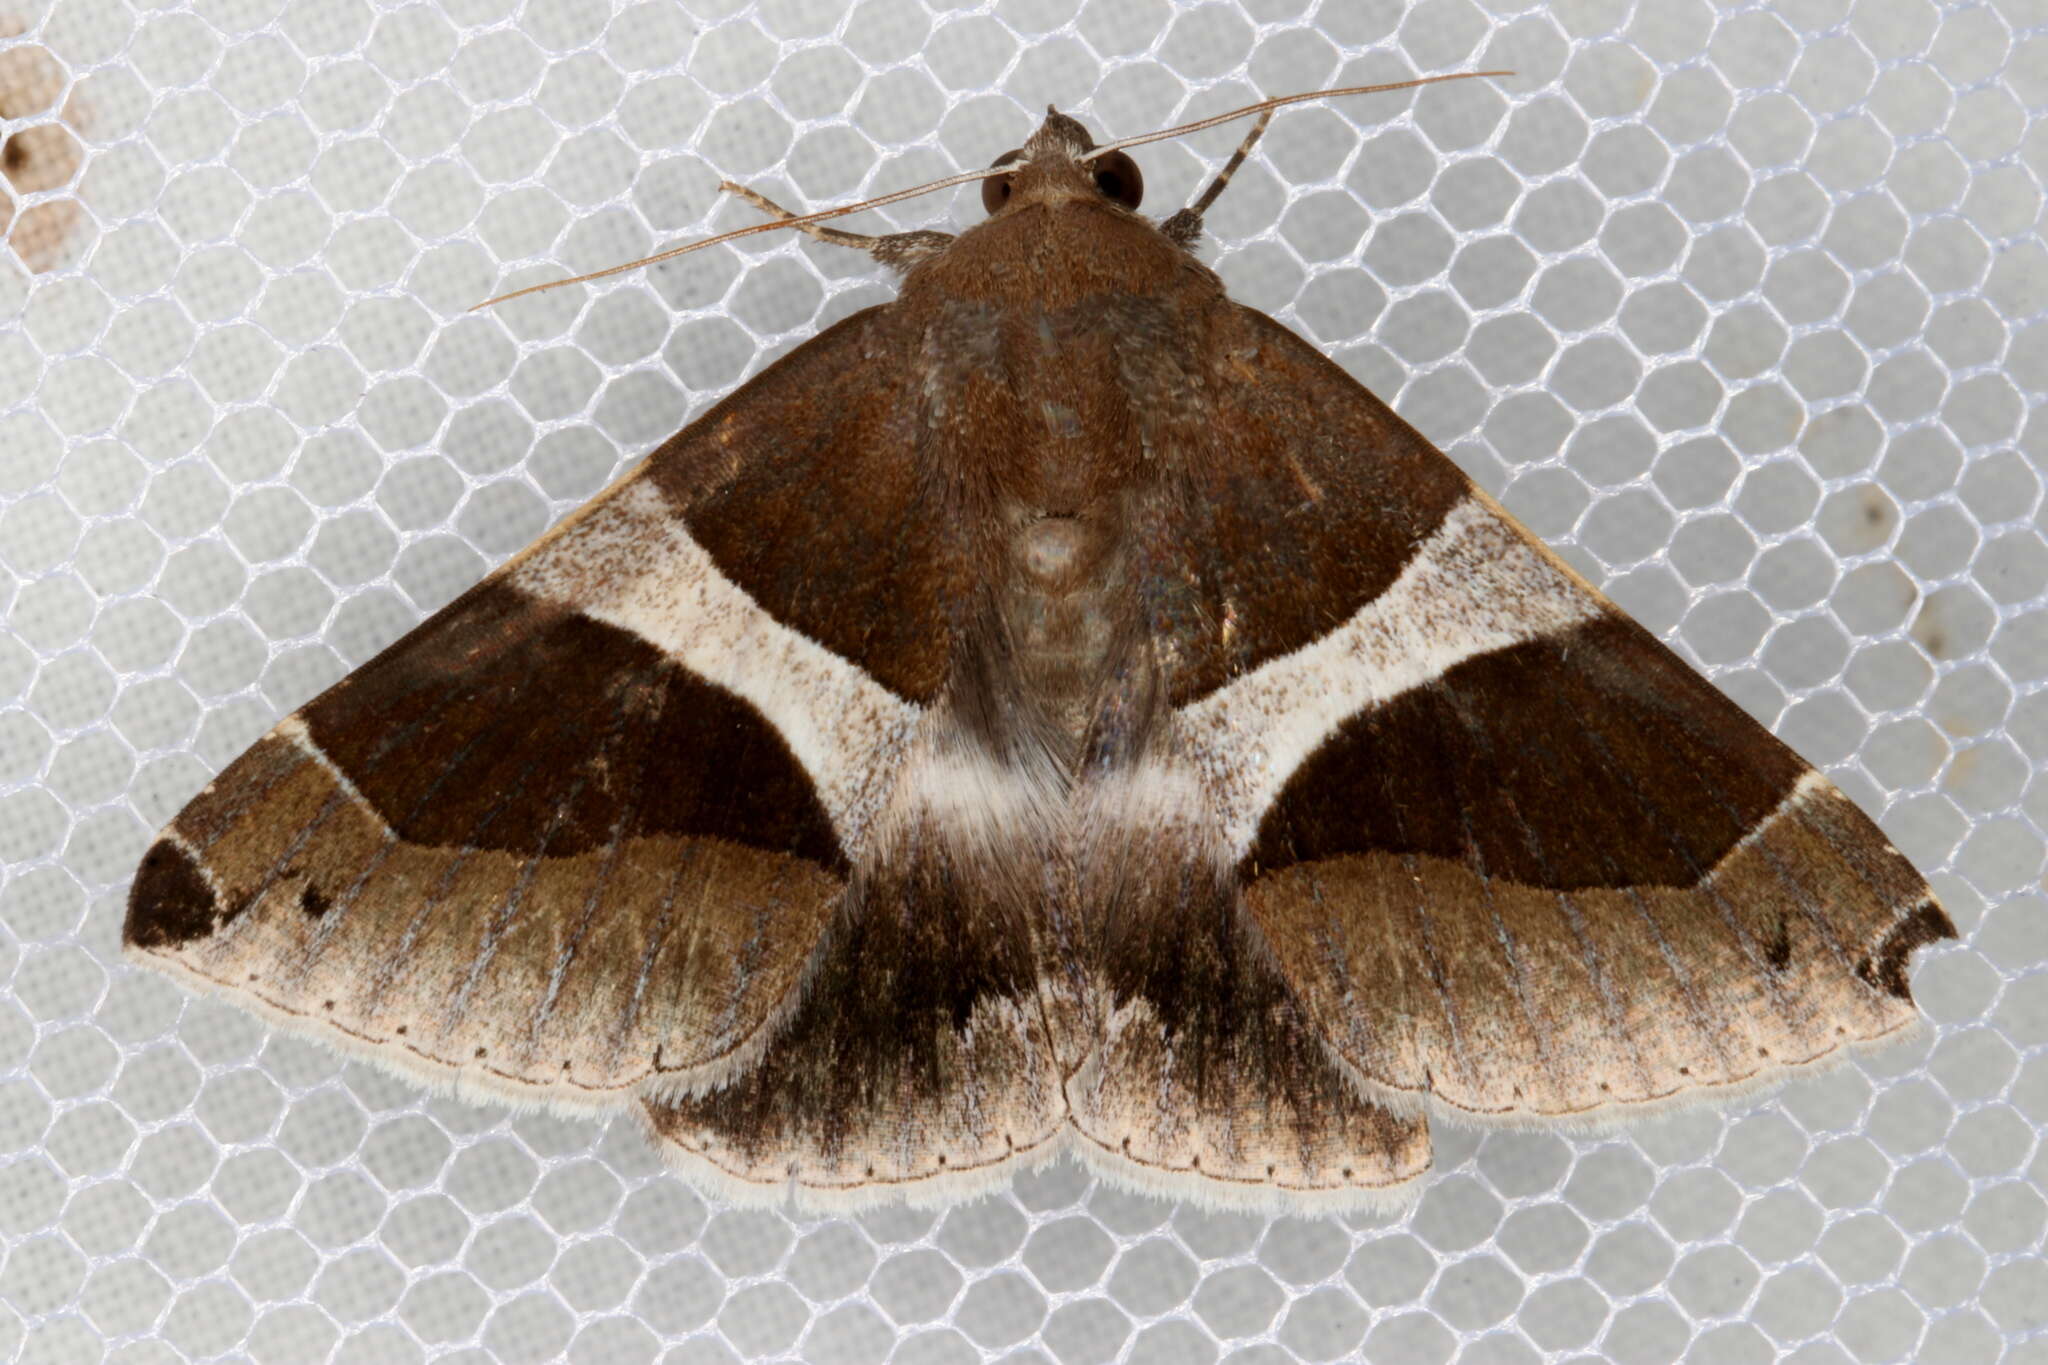 Image of Dysgonia constricta Butler 1874